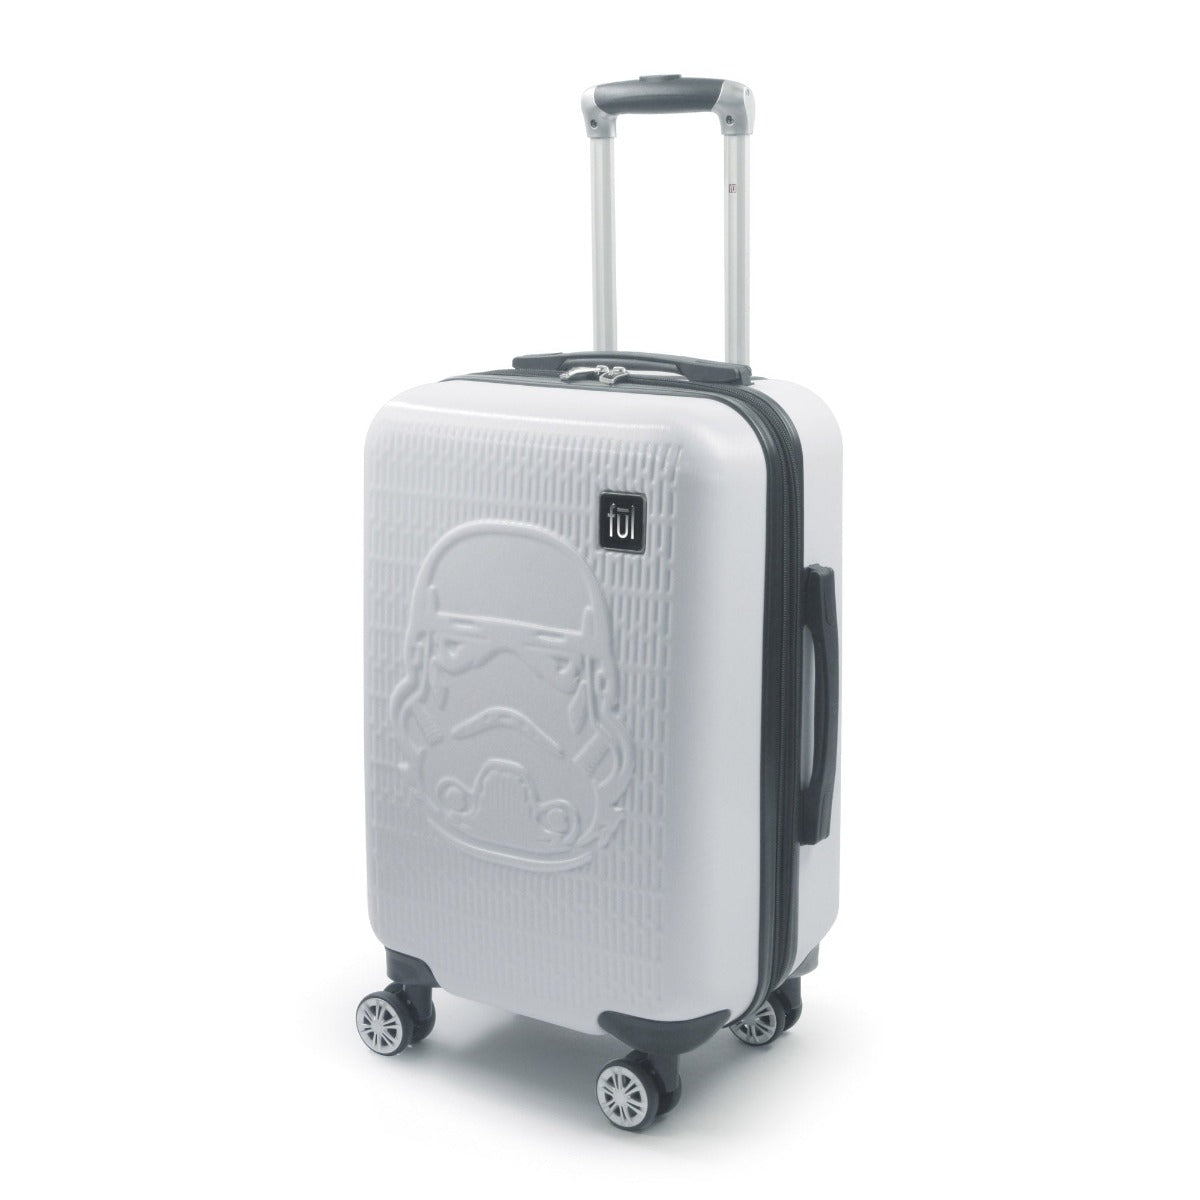 FUL Star Wars Storm Trooper Embossed 21-inch spinner wheeled suitcase luggage white